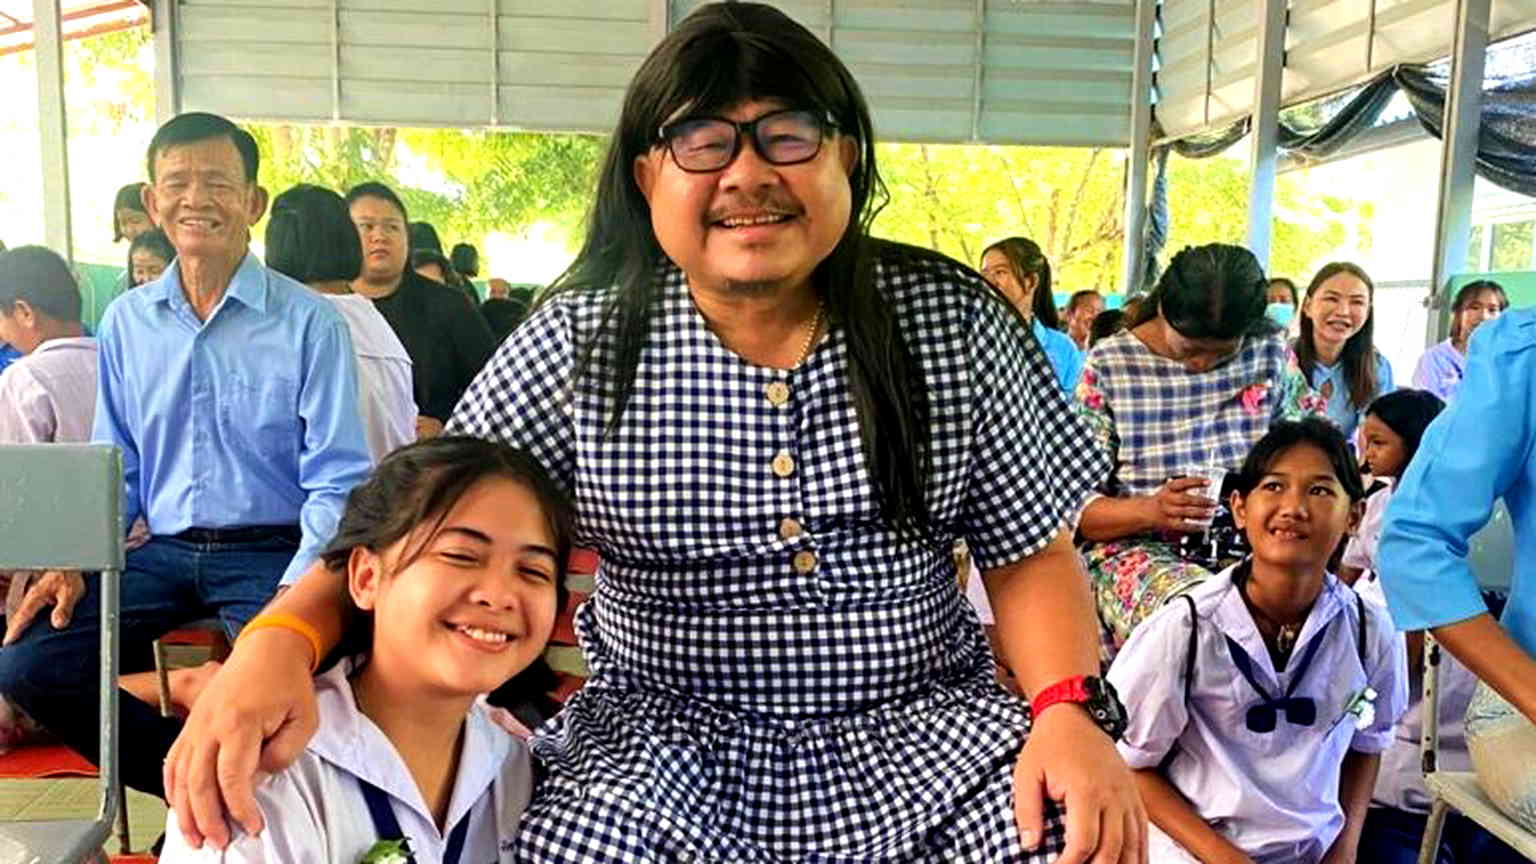 Thai father warms netizens’ hearts by dressing as woman for child’s Mother’s Day school event